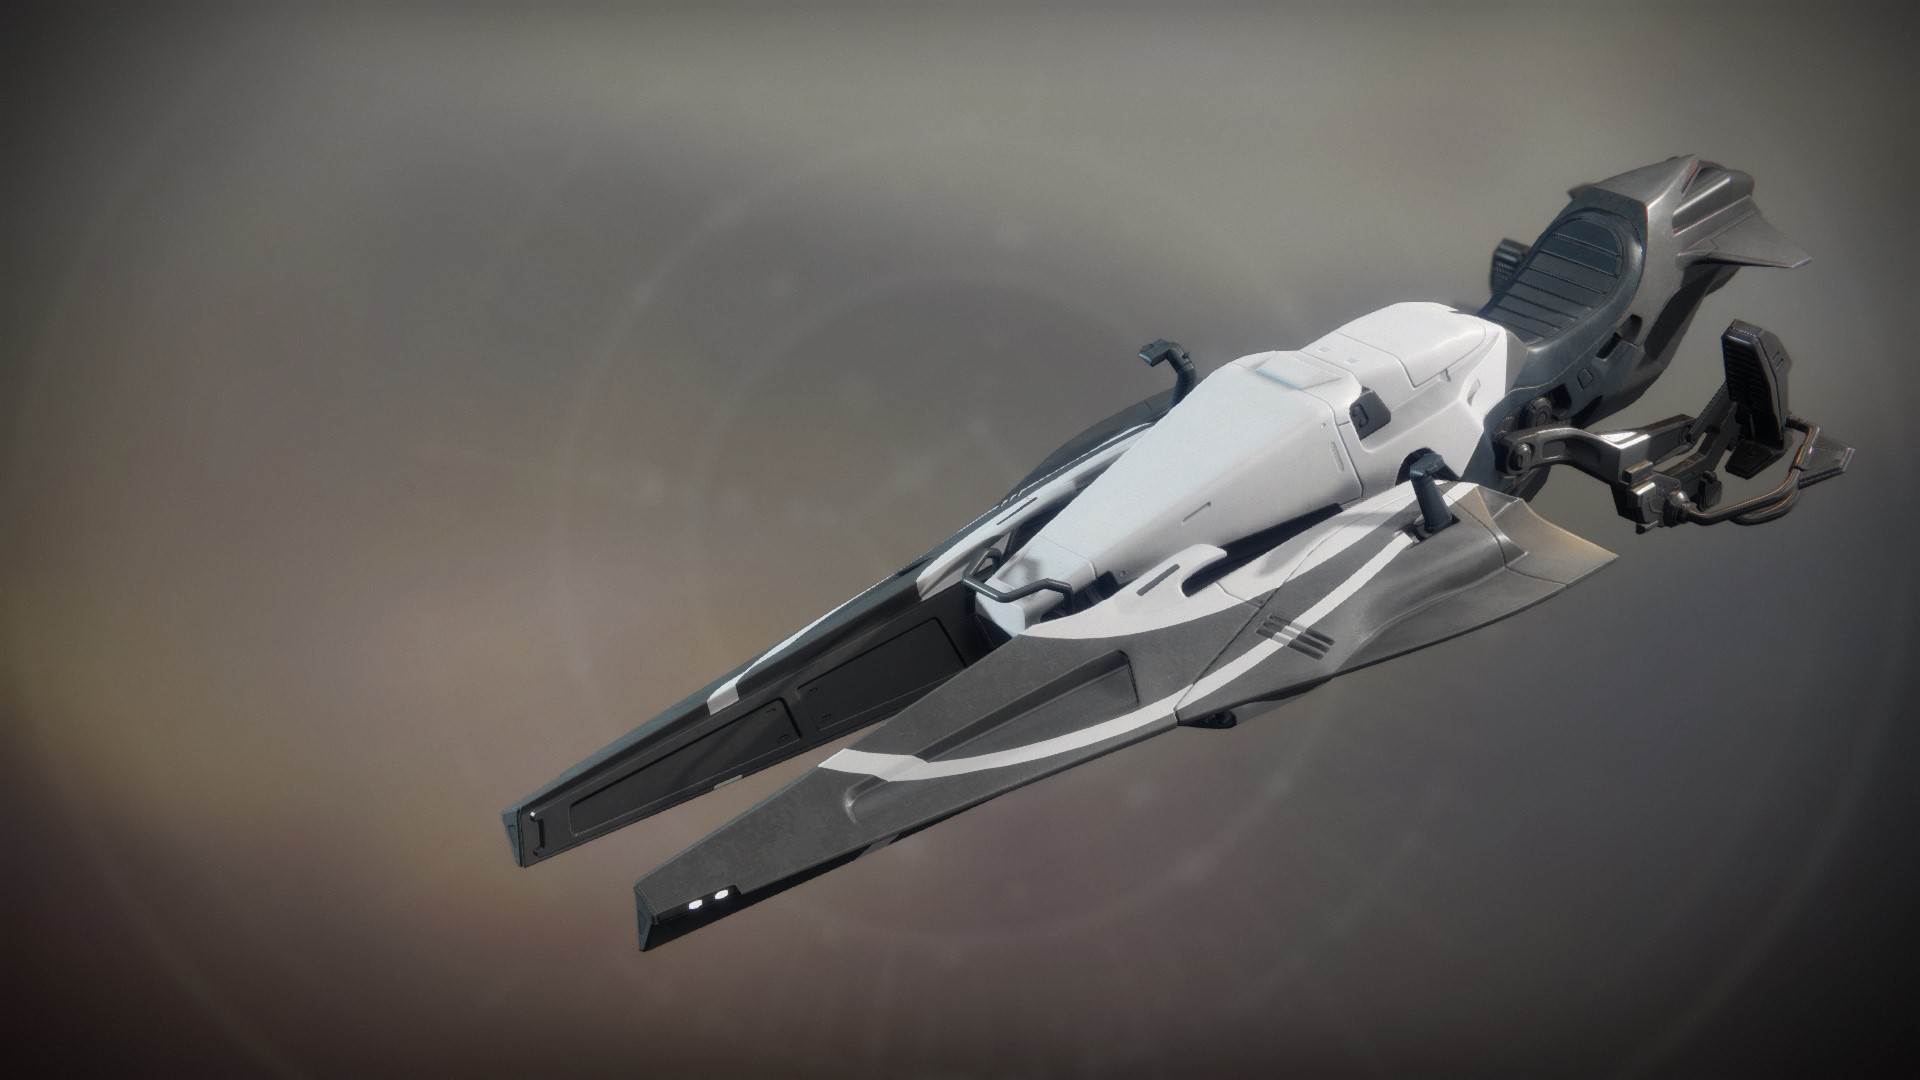 An in-game render of the Wind Shrike.